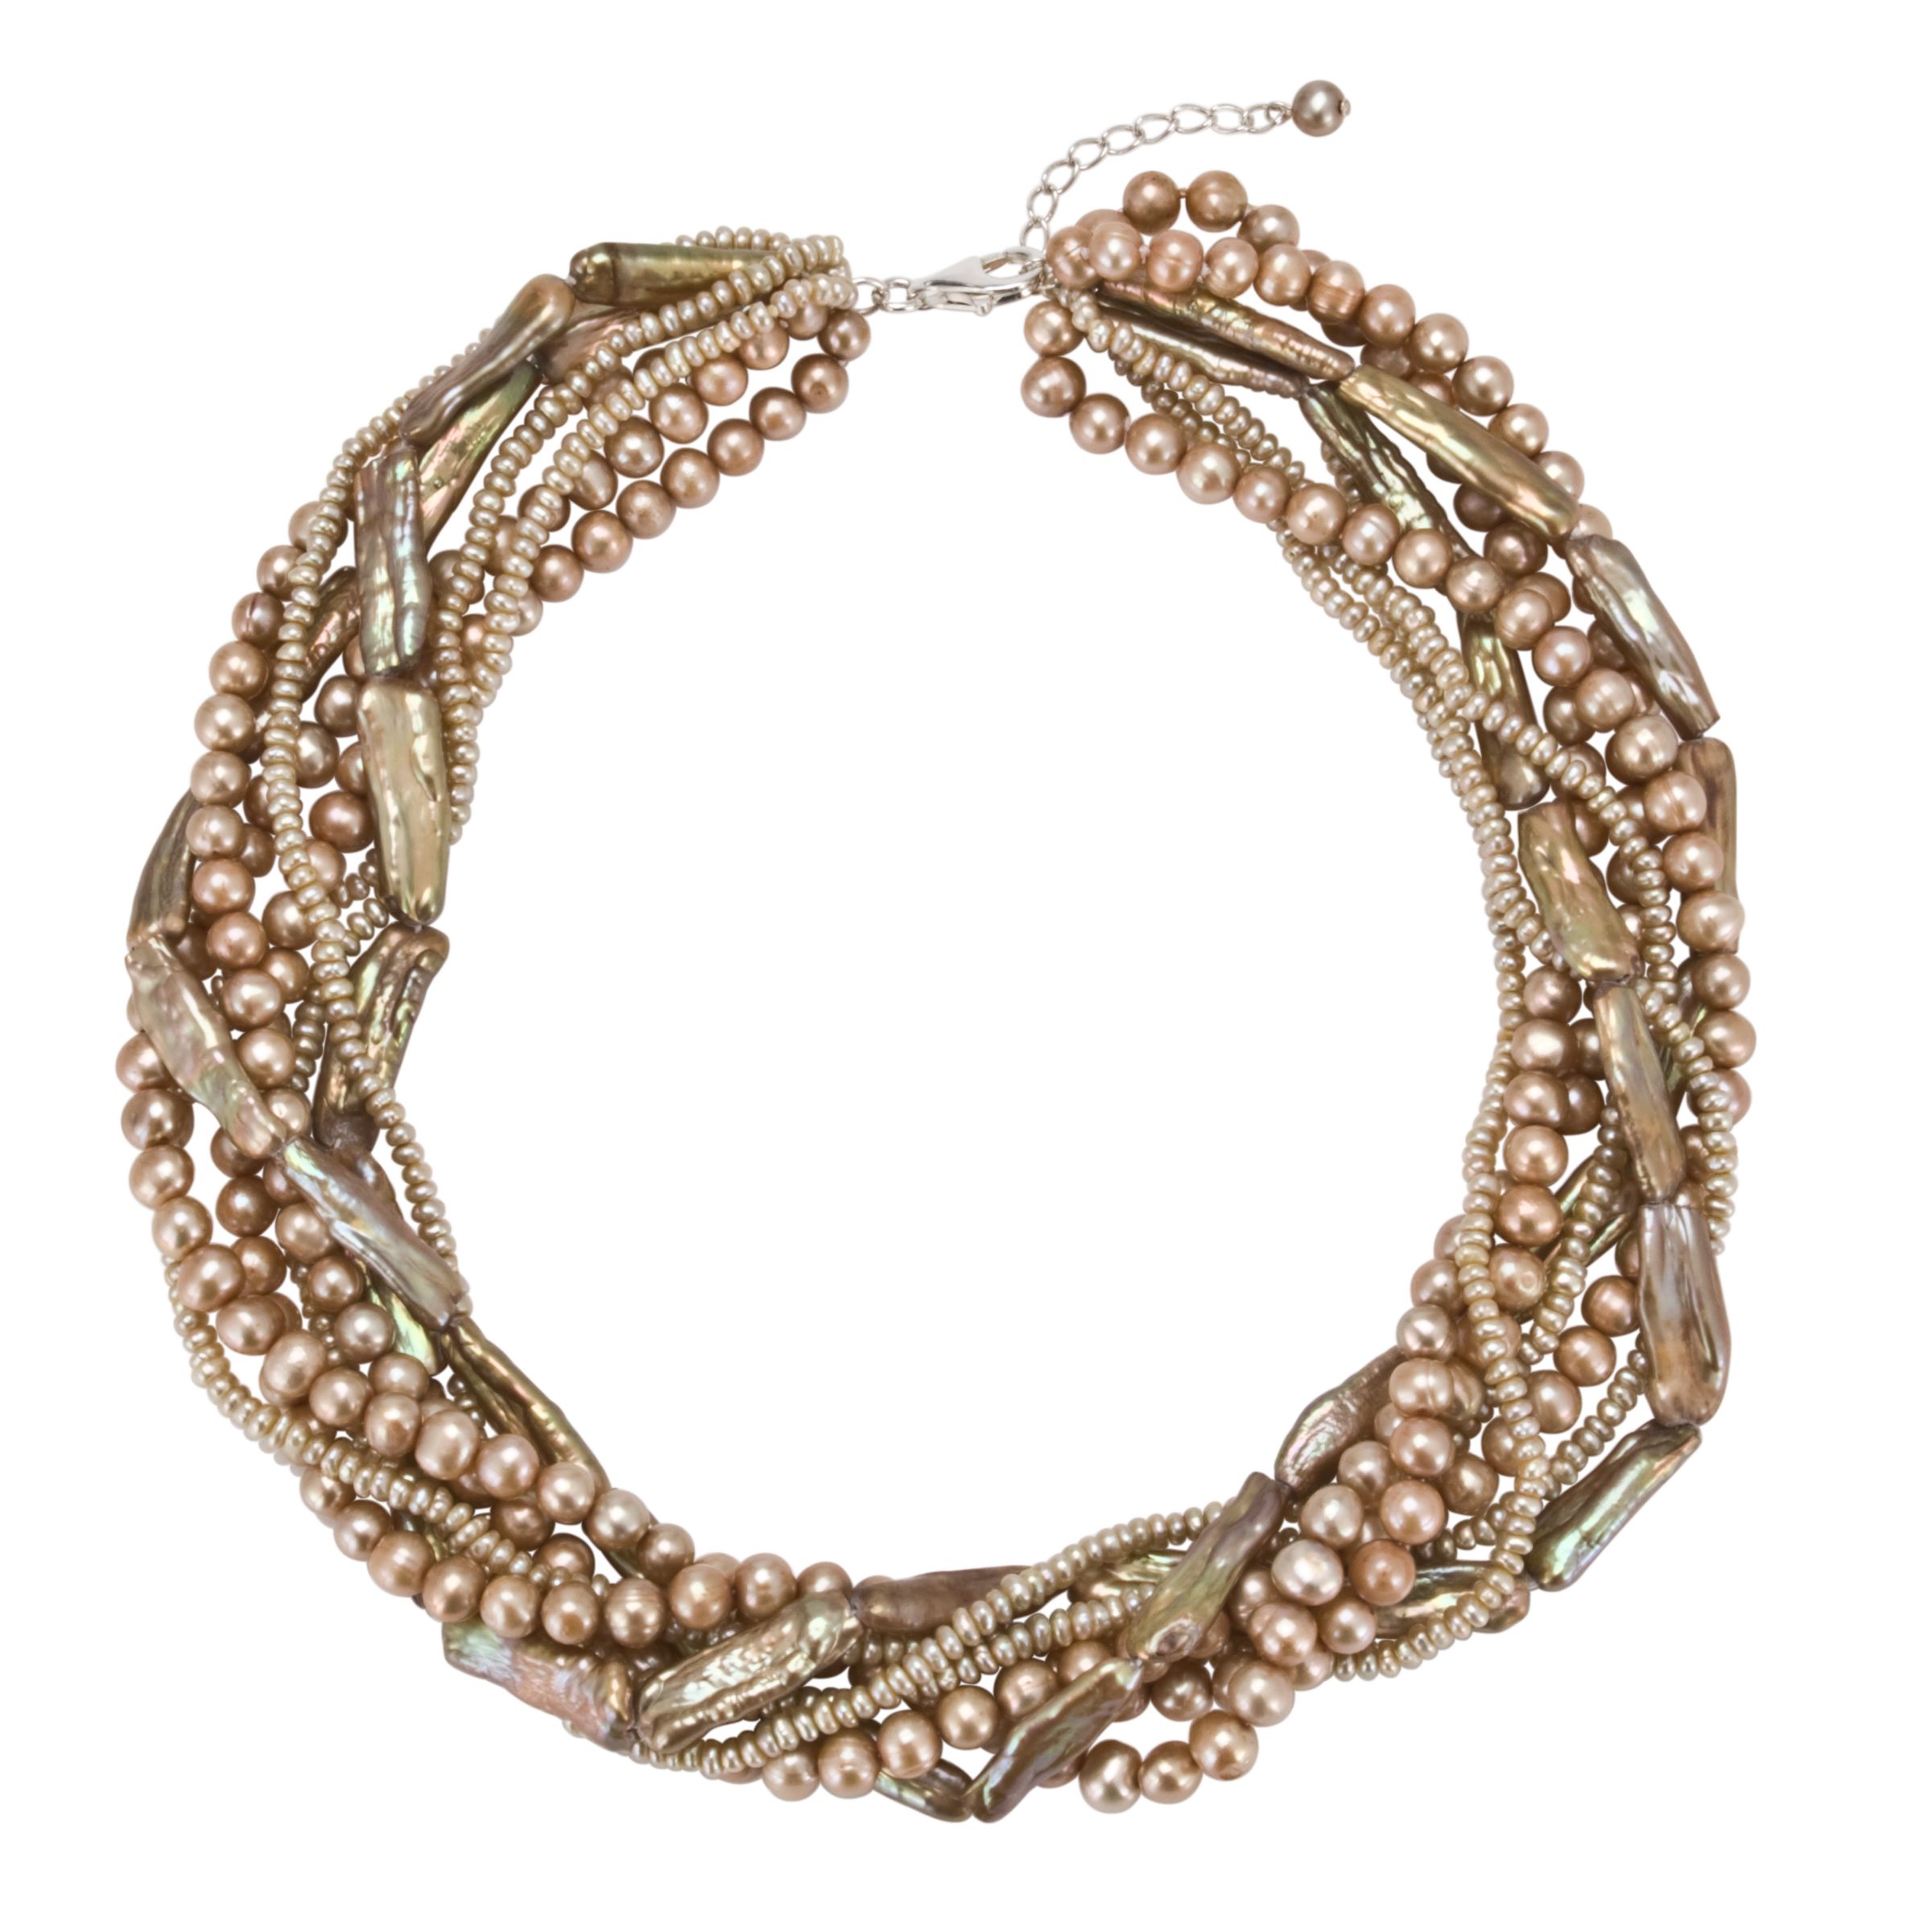 Lido Pearls 8 Row Gold Pearls Twist Necklace at JohnLewis